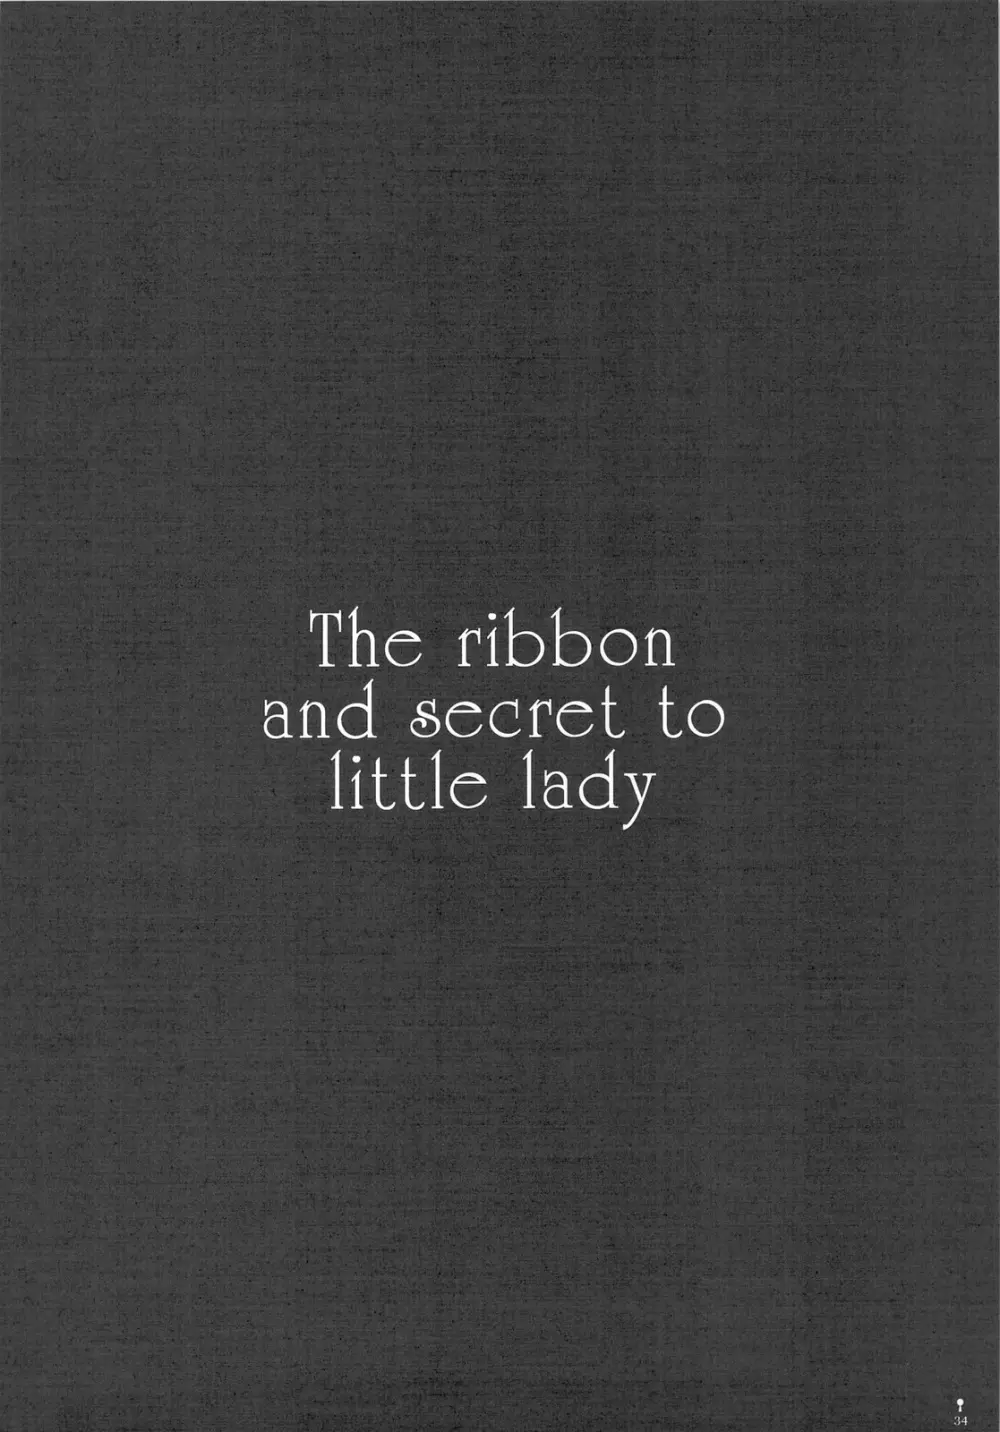 The ribbon and secret to little lady 36ページ